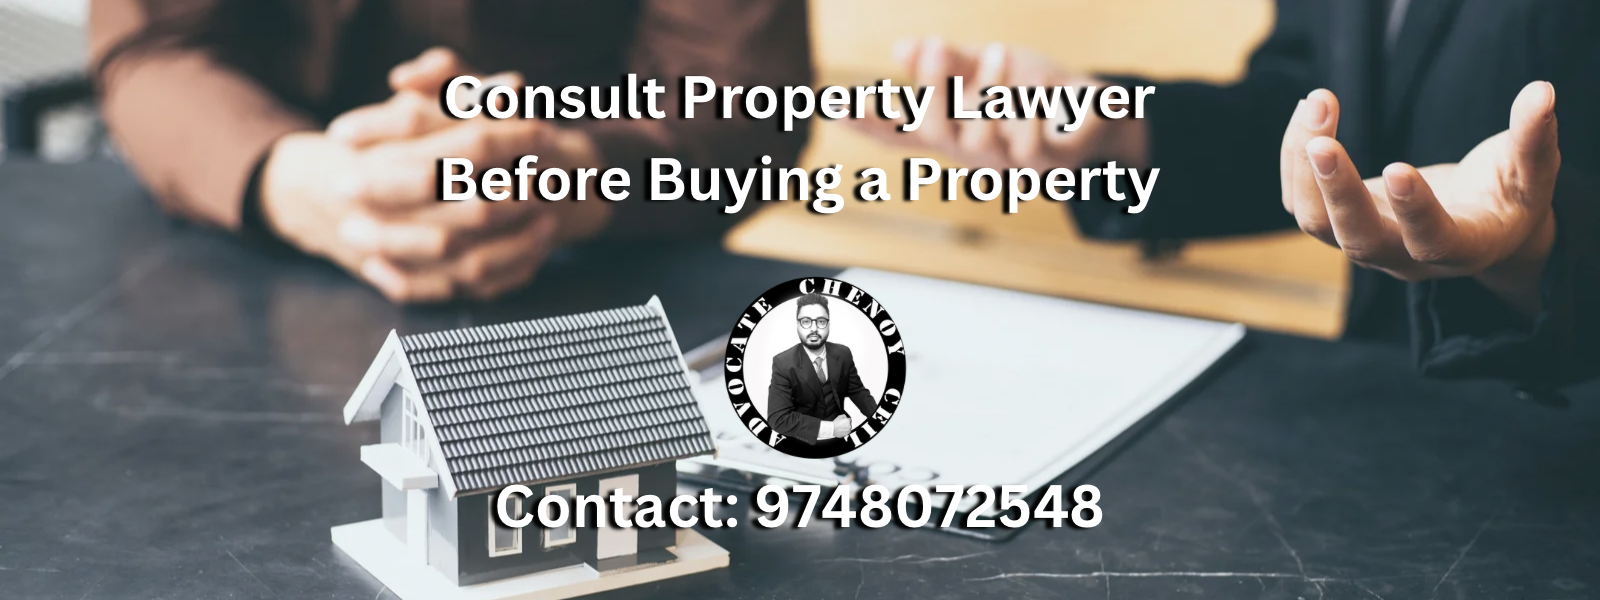 consult lawyer before buying property